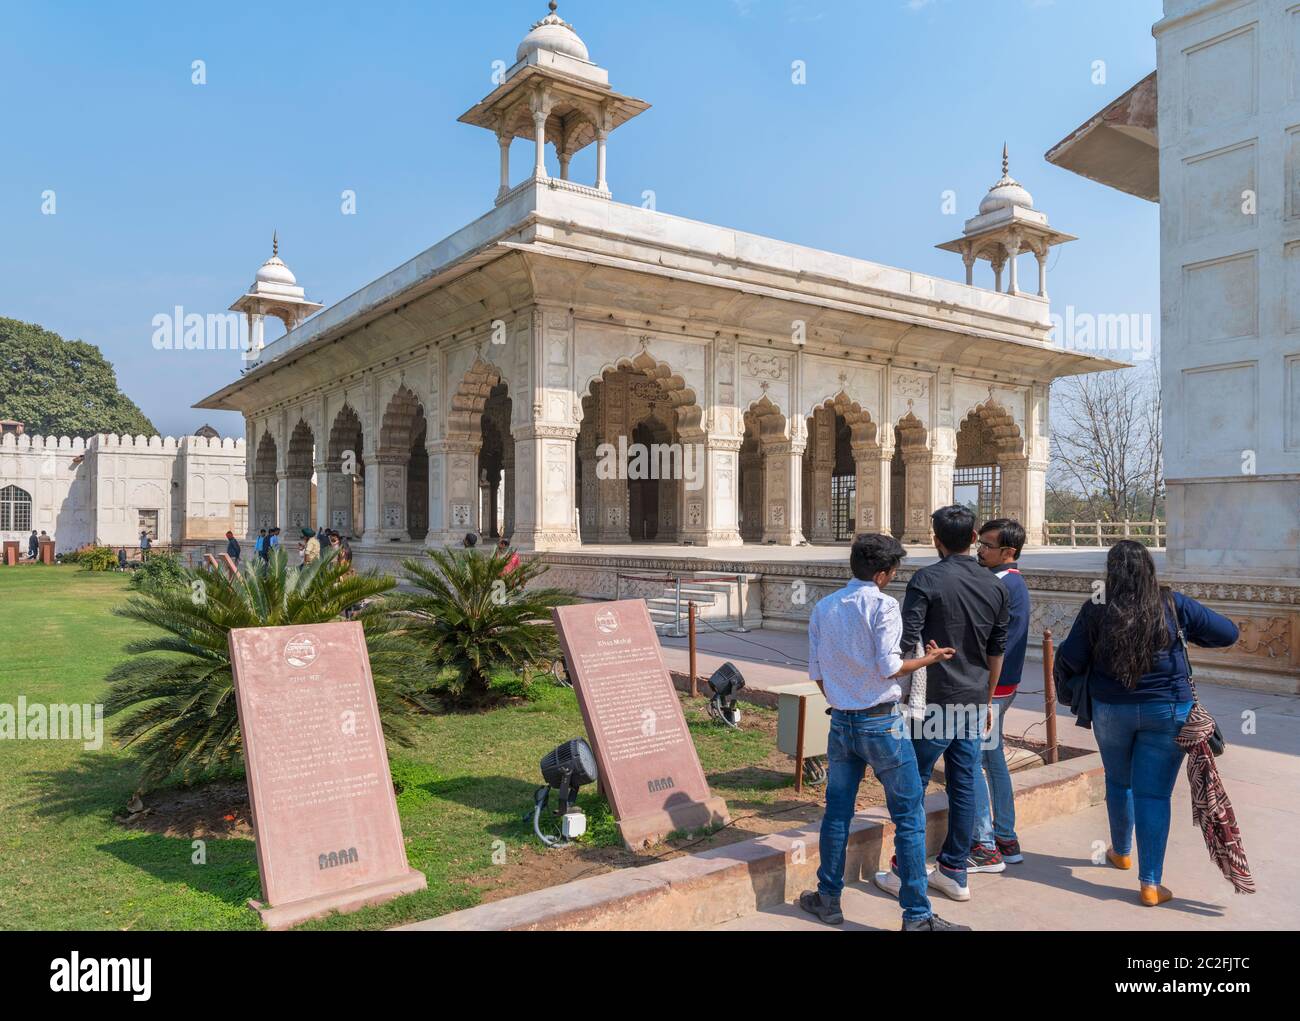 The Khas Mahal, the Emperor's private palace in the Red Fort, Delhi, India Stock Photo